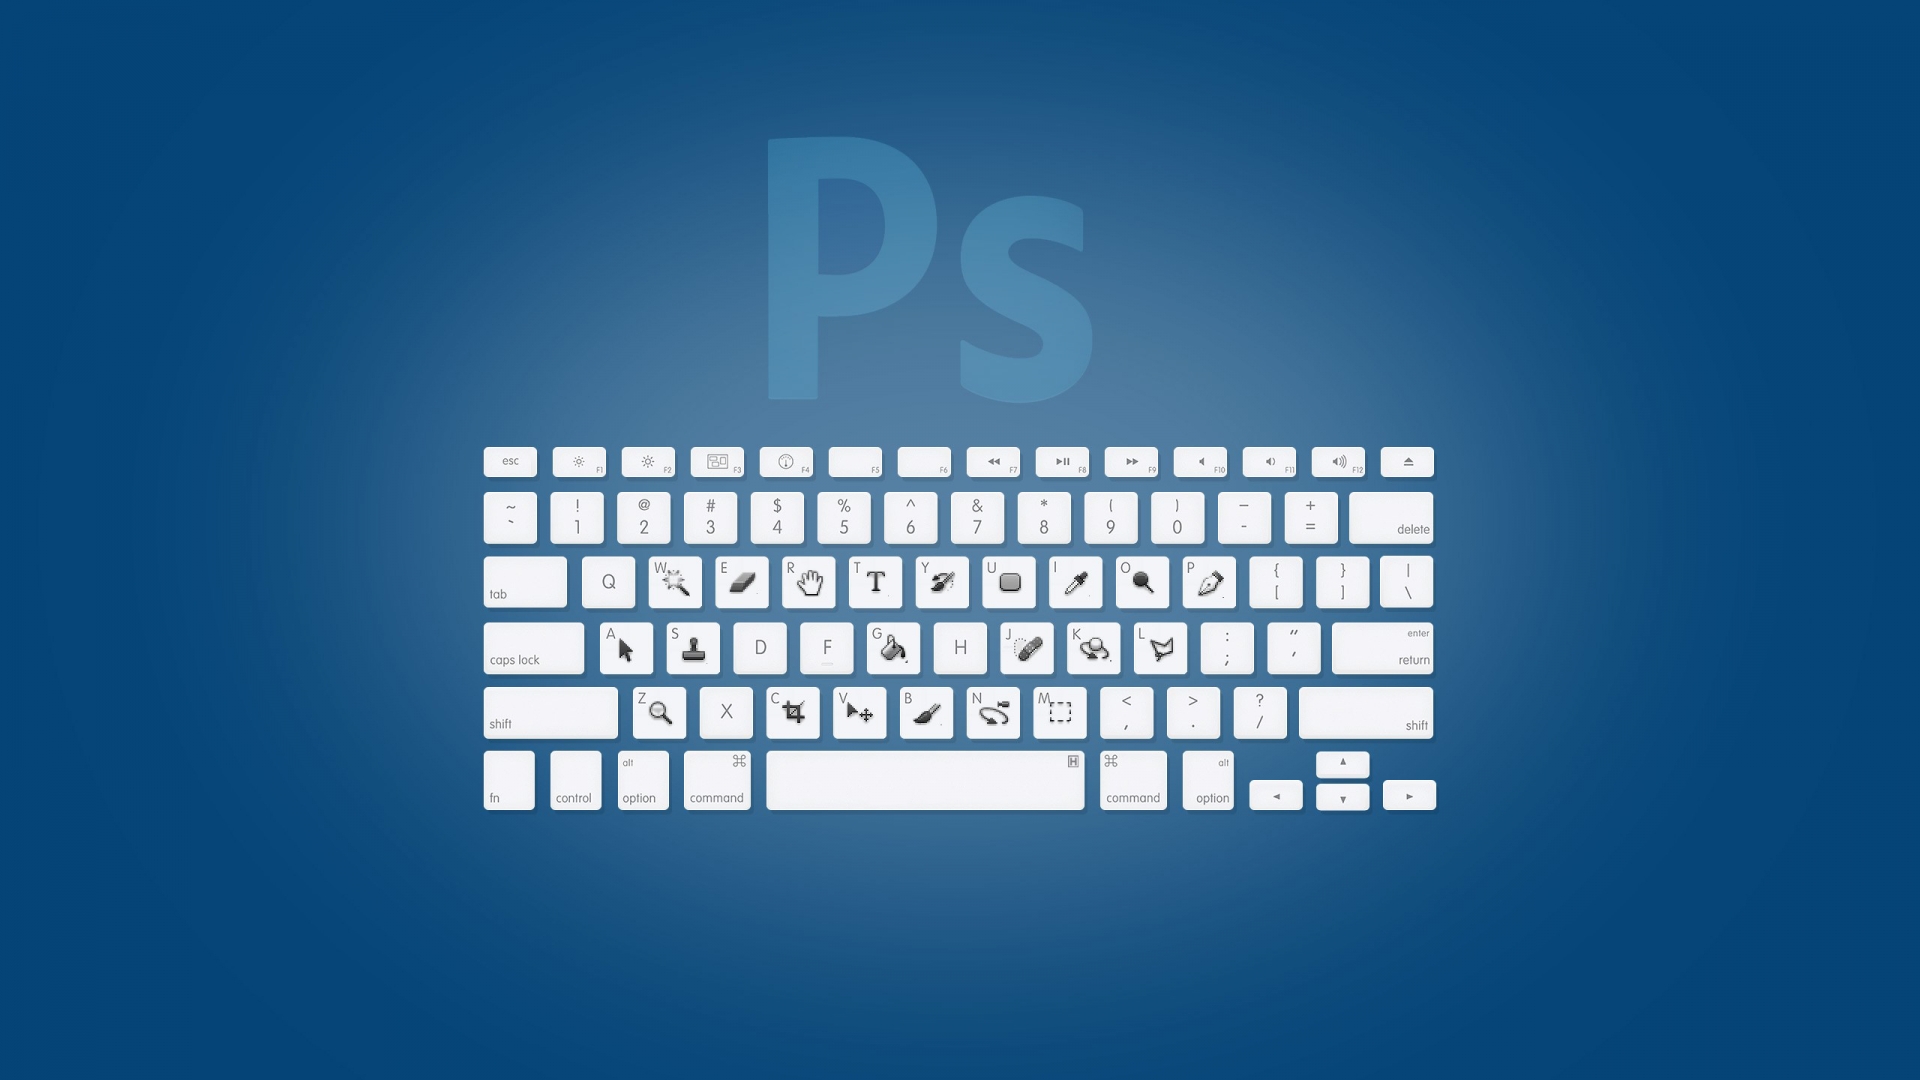 Photoshop Keyboard for 1920 x 1080 HDTV 1080p resolution